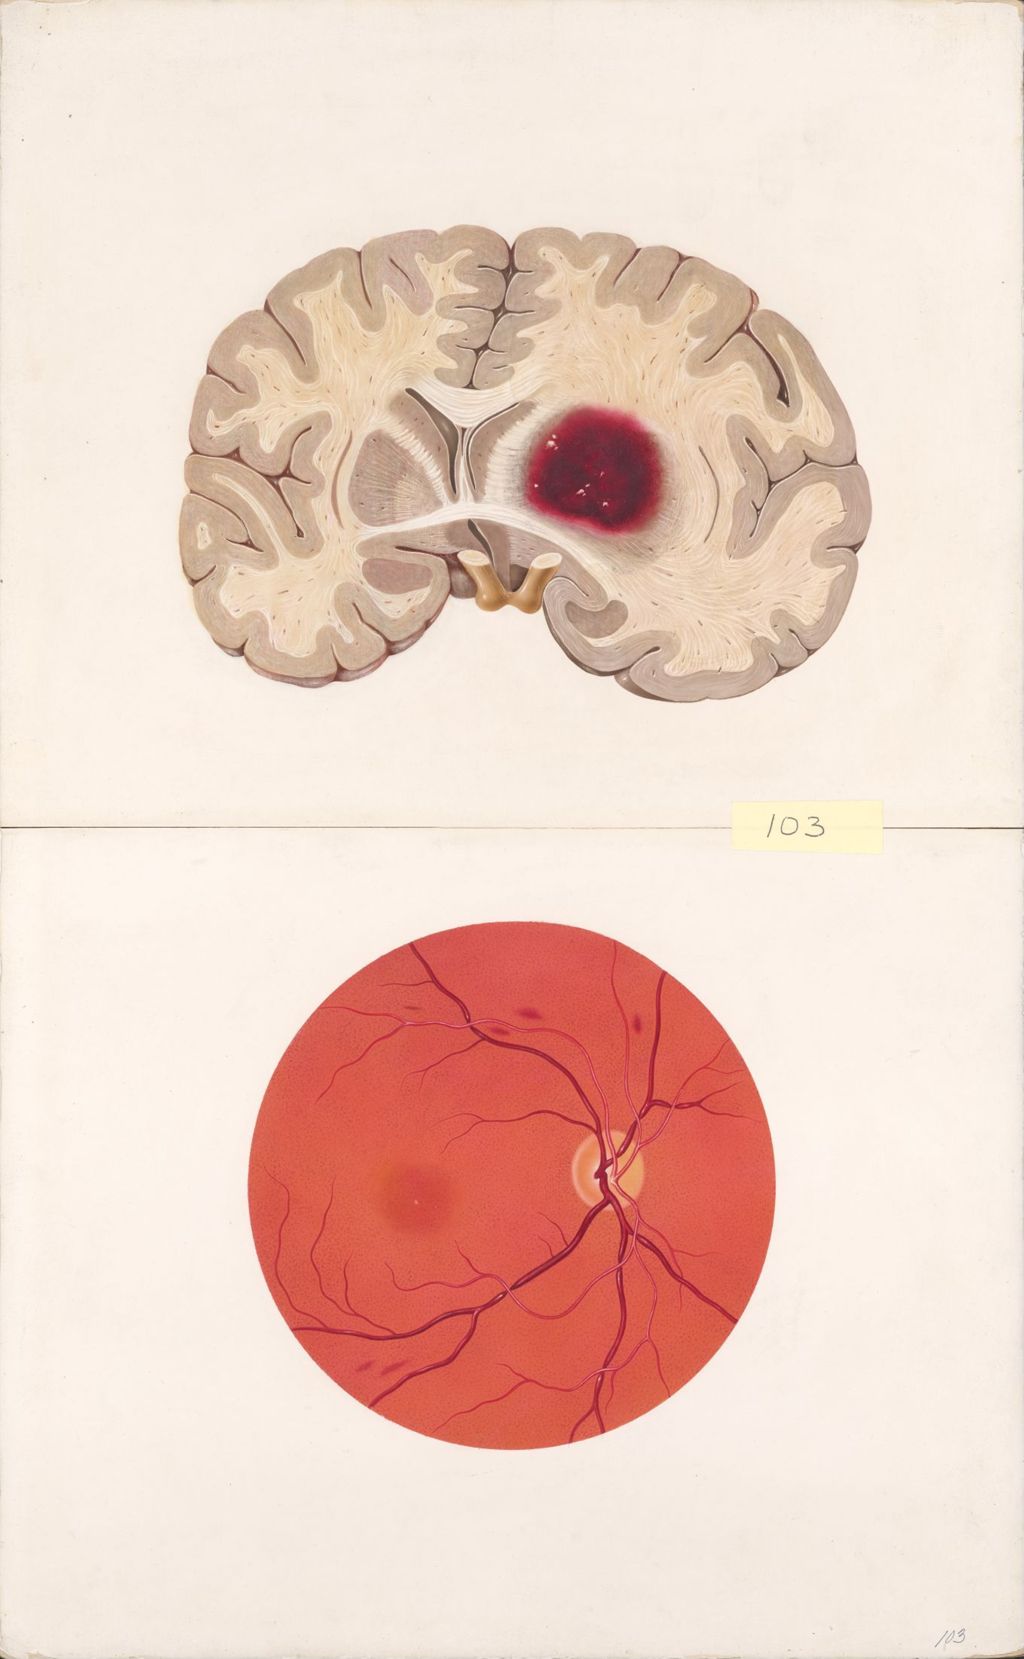 Medical Profiles, Hydropres, Hypertension in the Brain and Fundus, Plate III